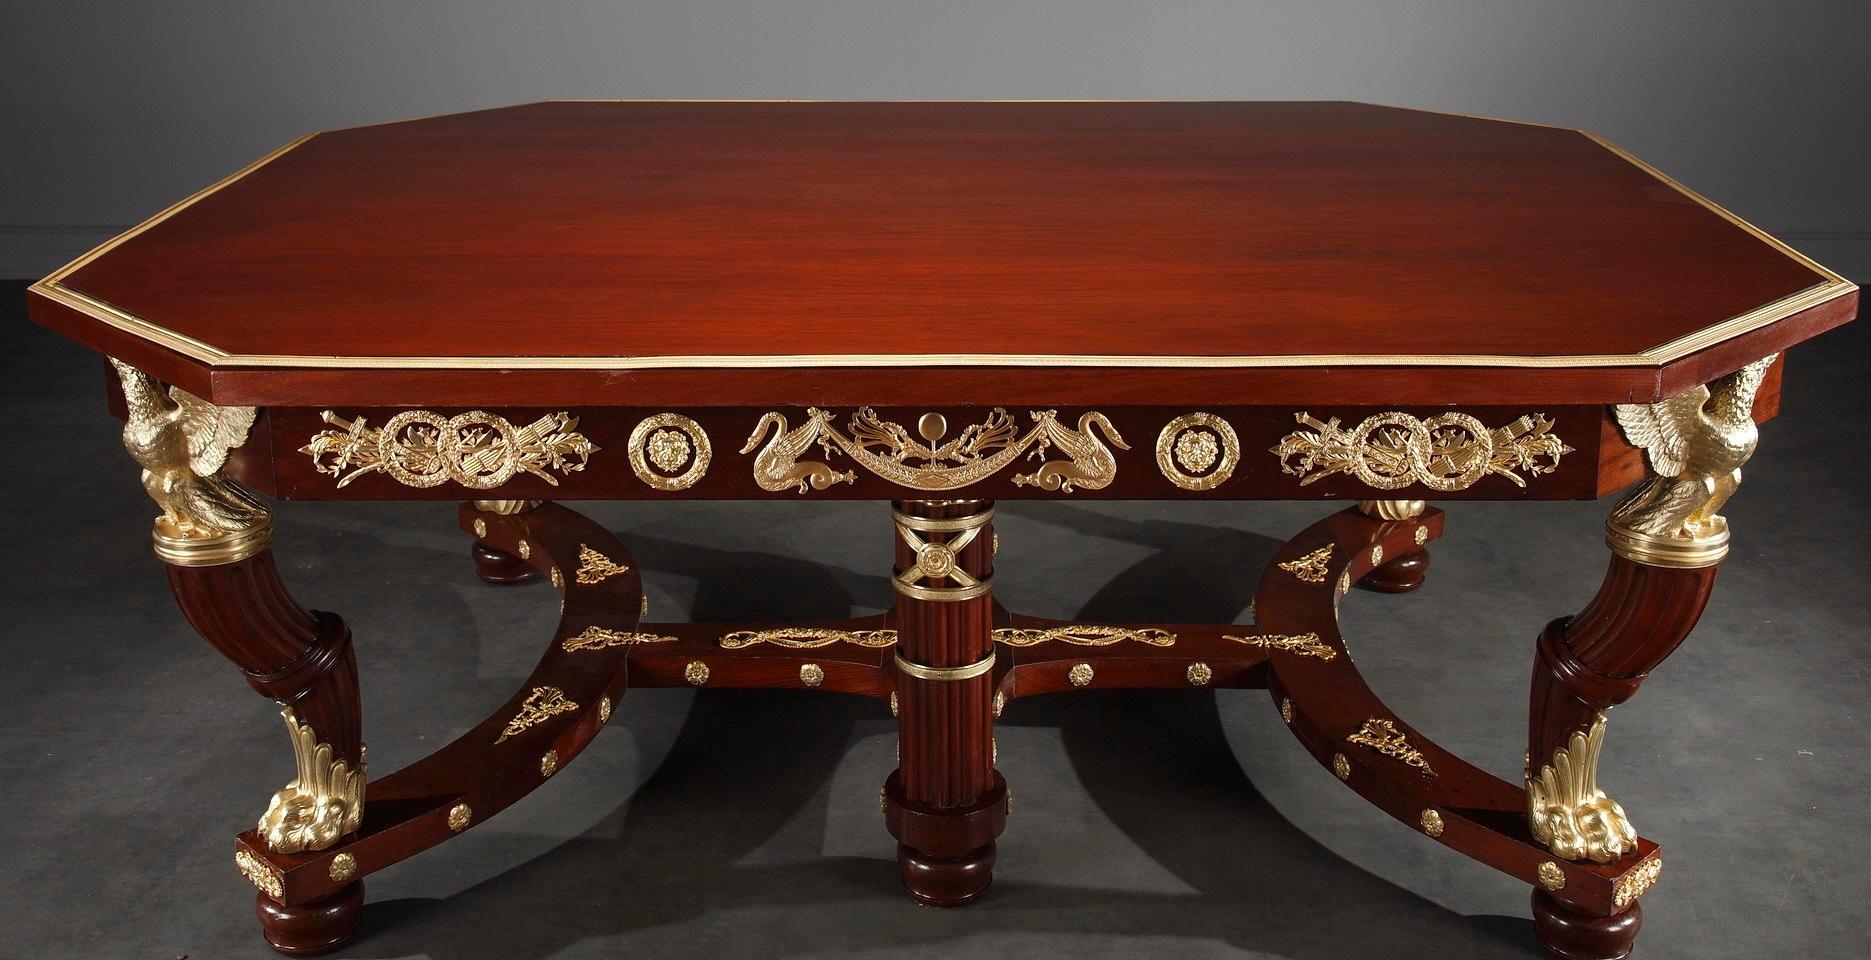 French 19th Century Mahogany and Gilt Bronze Dining Room Suite in Empire Style